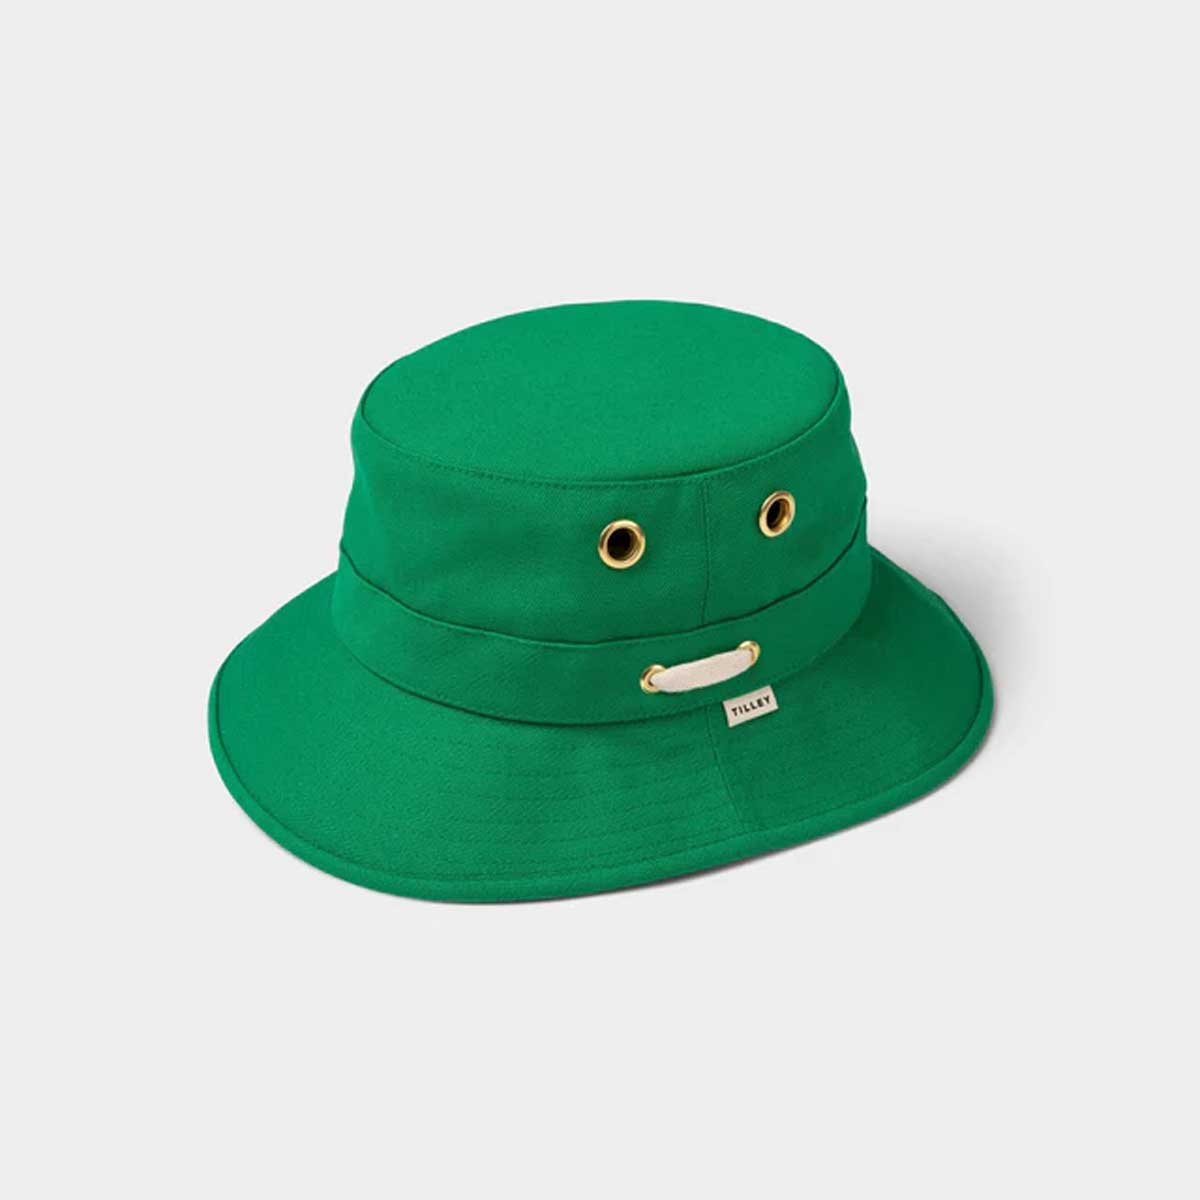 TILLEY Iconic T1 Bucket Hat - Bright Green